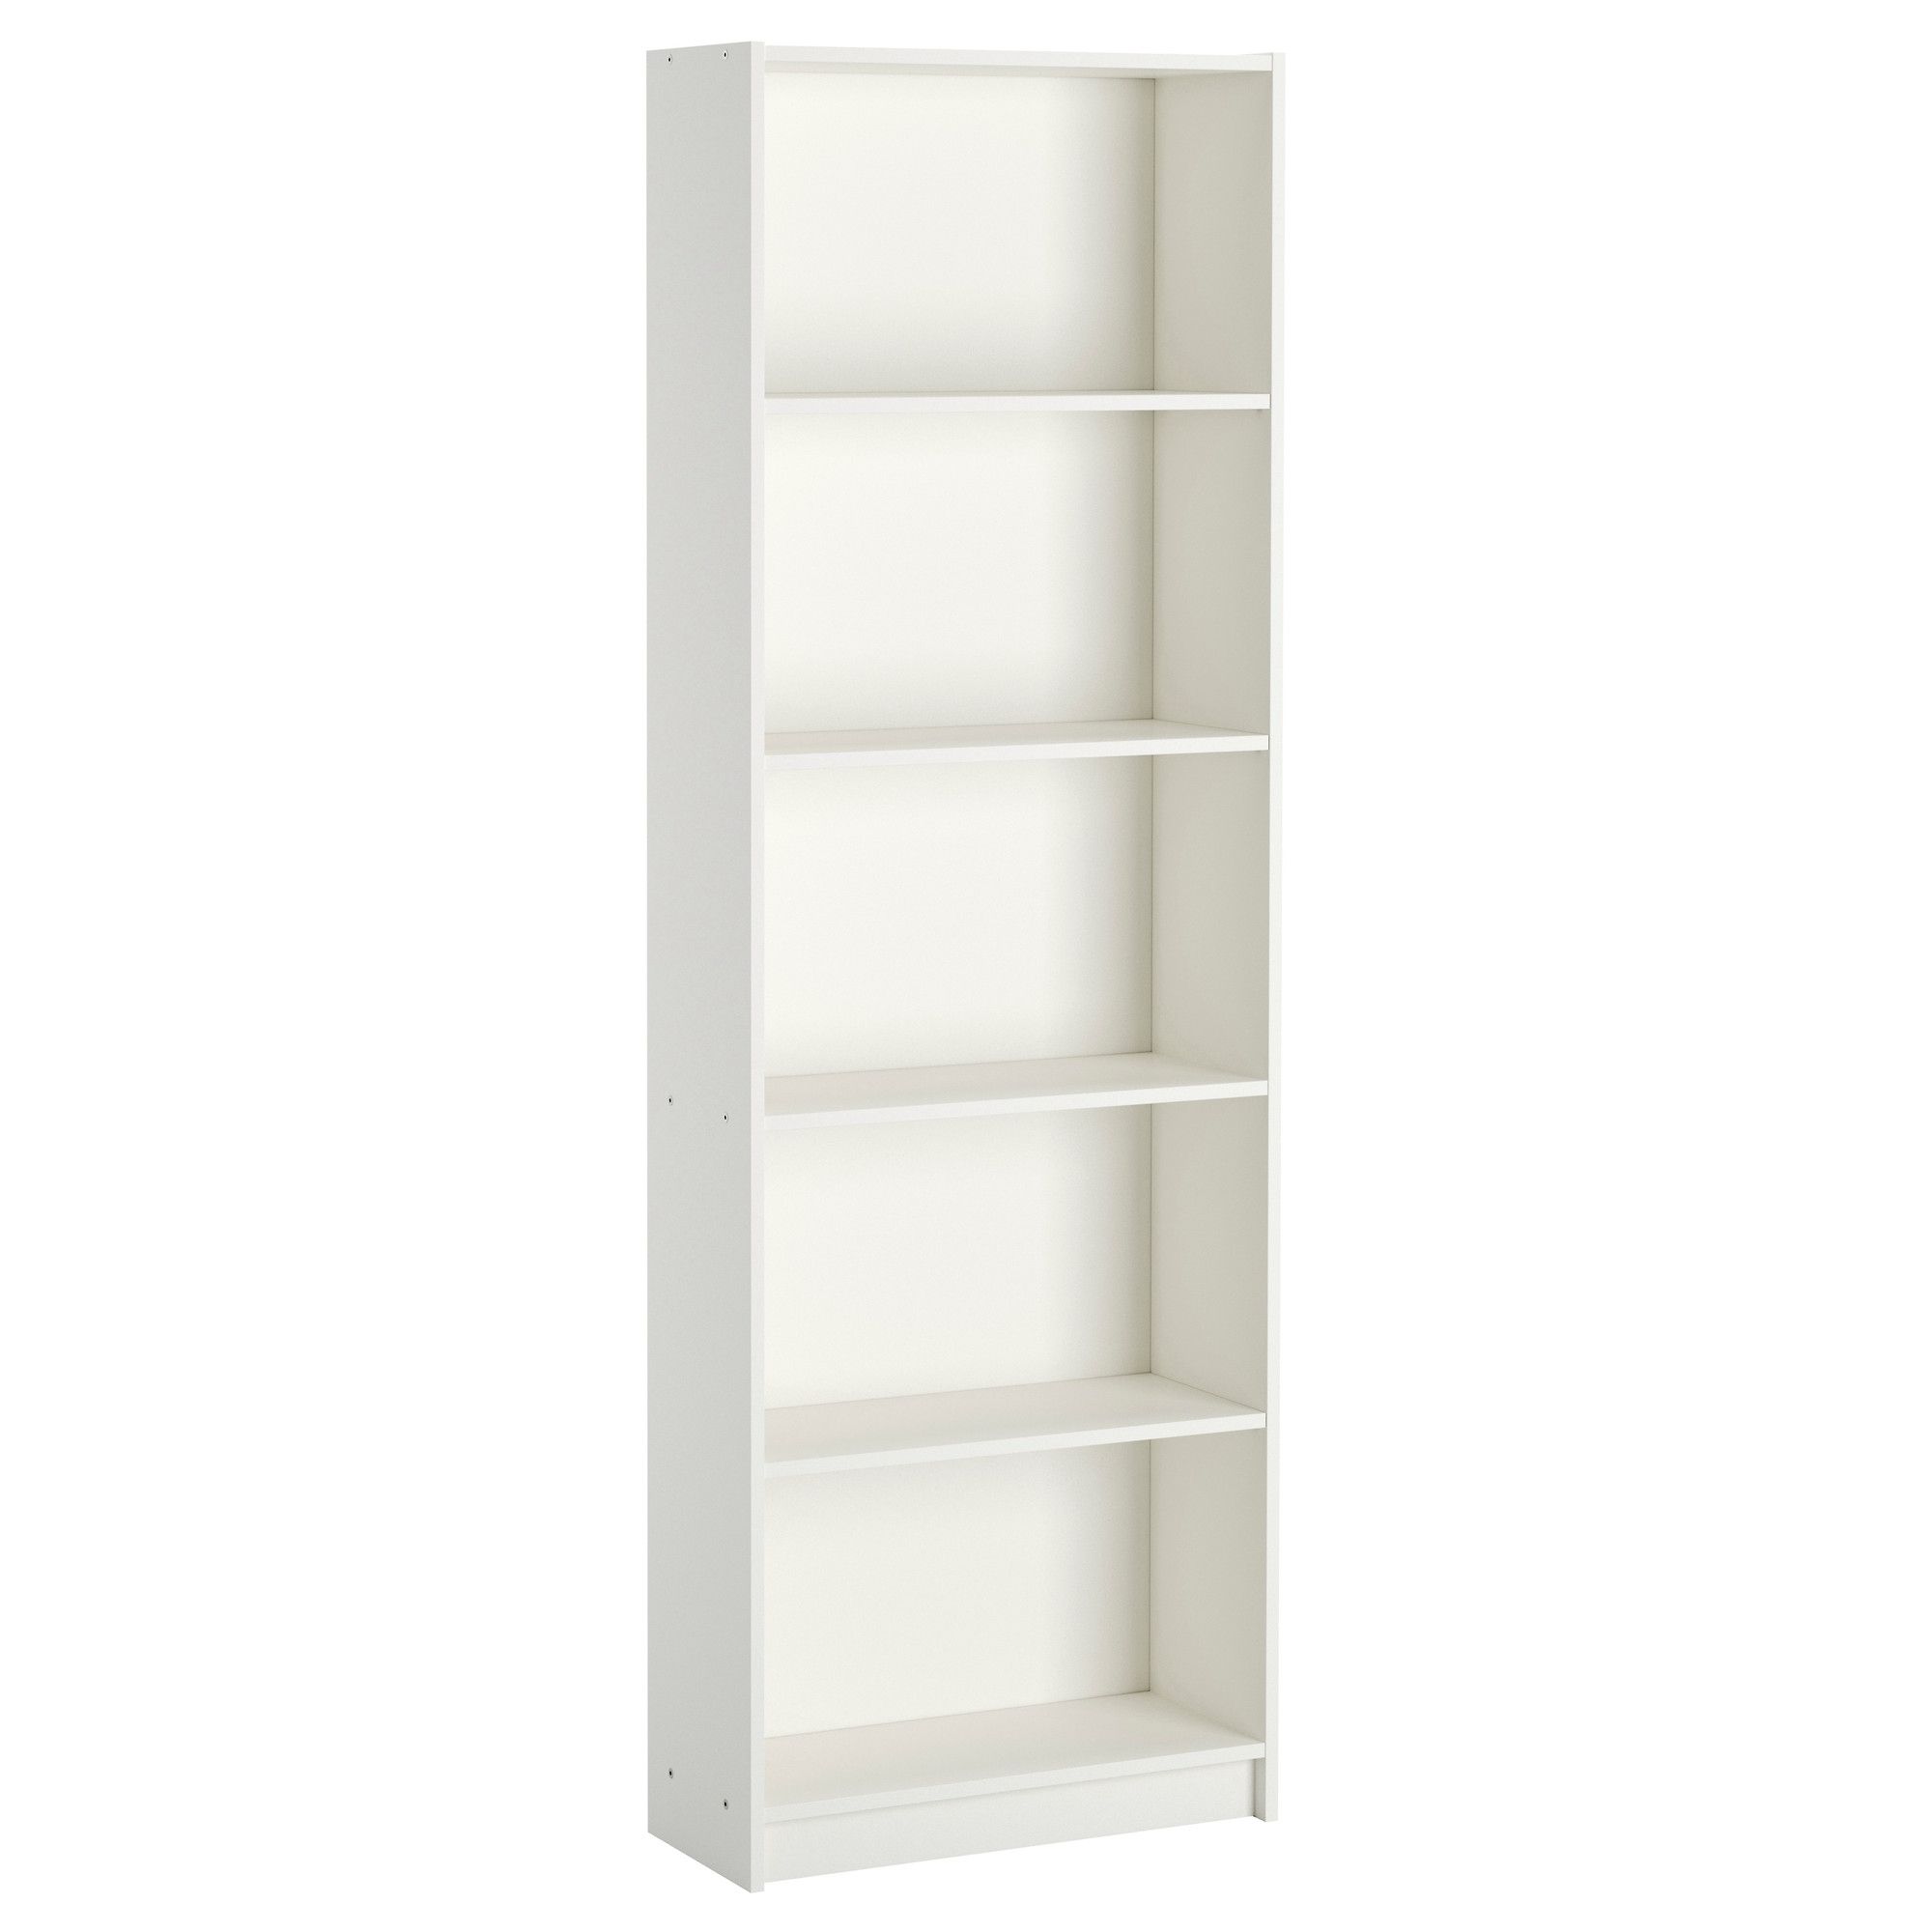 Ikea Bookcases With Famous Gersby Bookcase – Ikea (View 6 of 15)